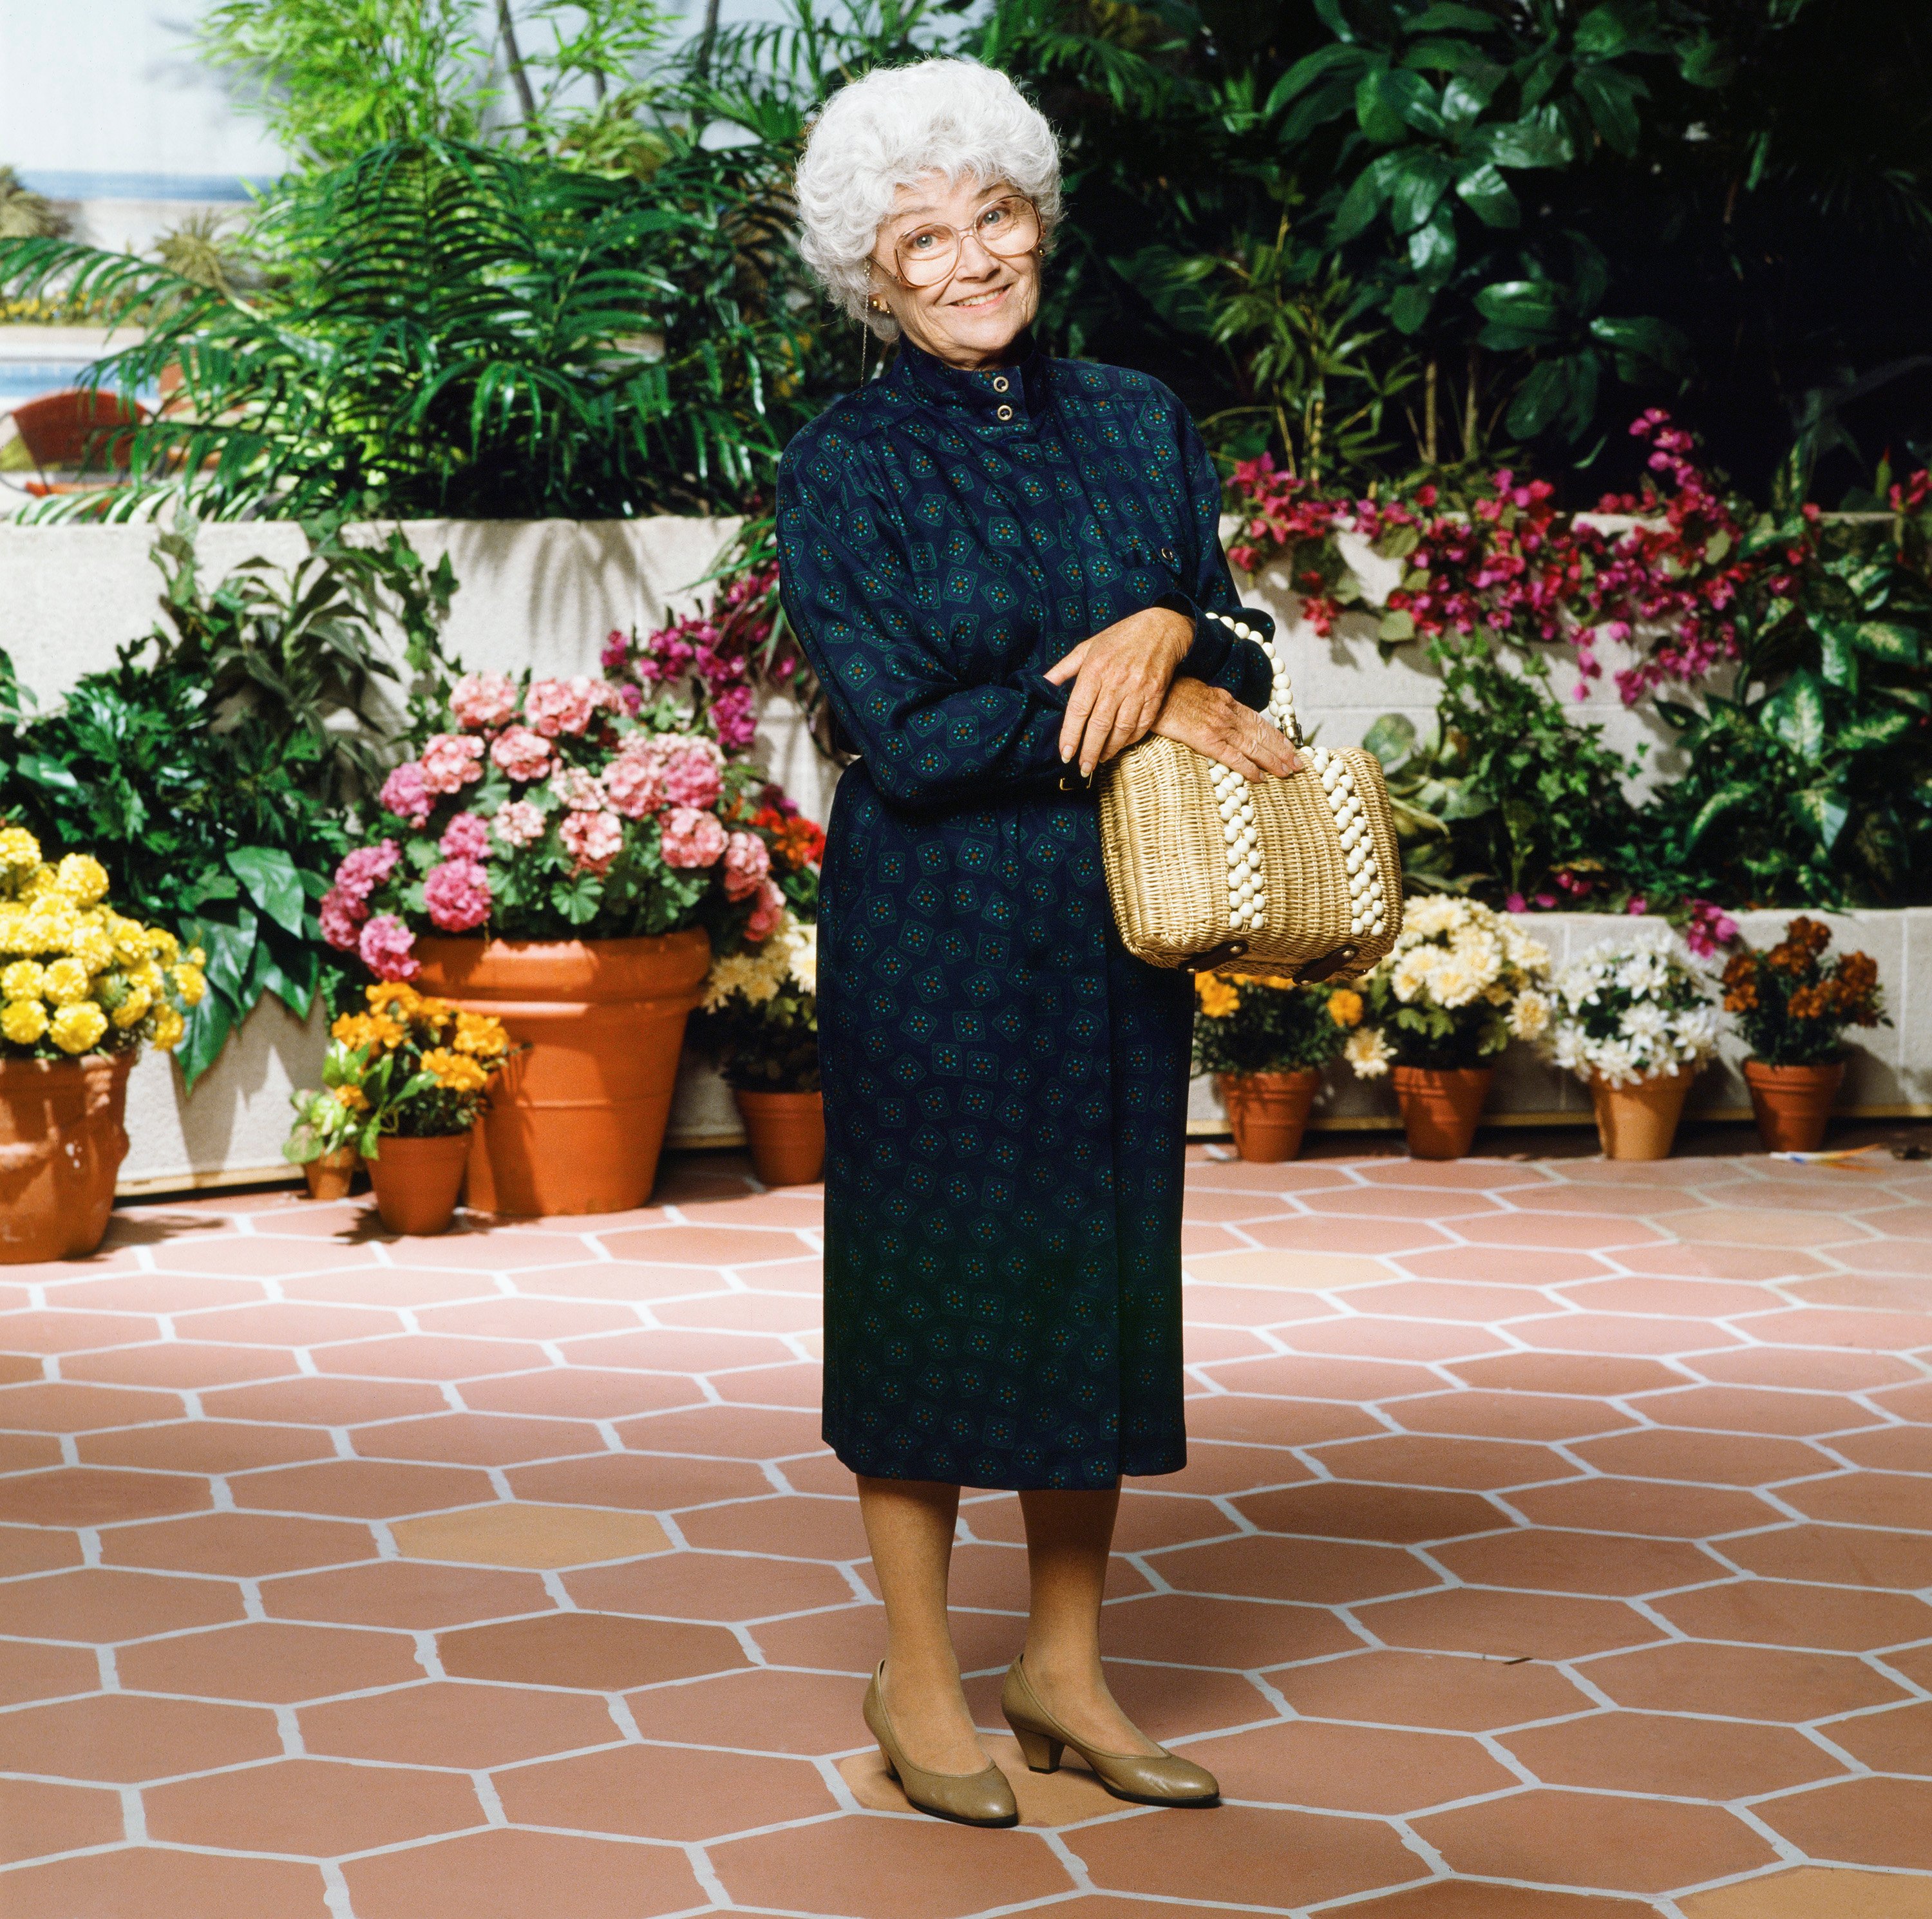 'The Golden Girls' actor Estelle Getty wearing a blue dress and glasses, and standing on a lanai.